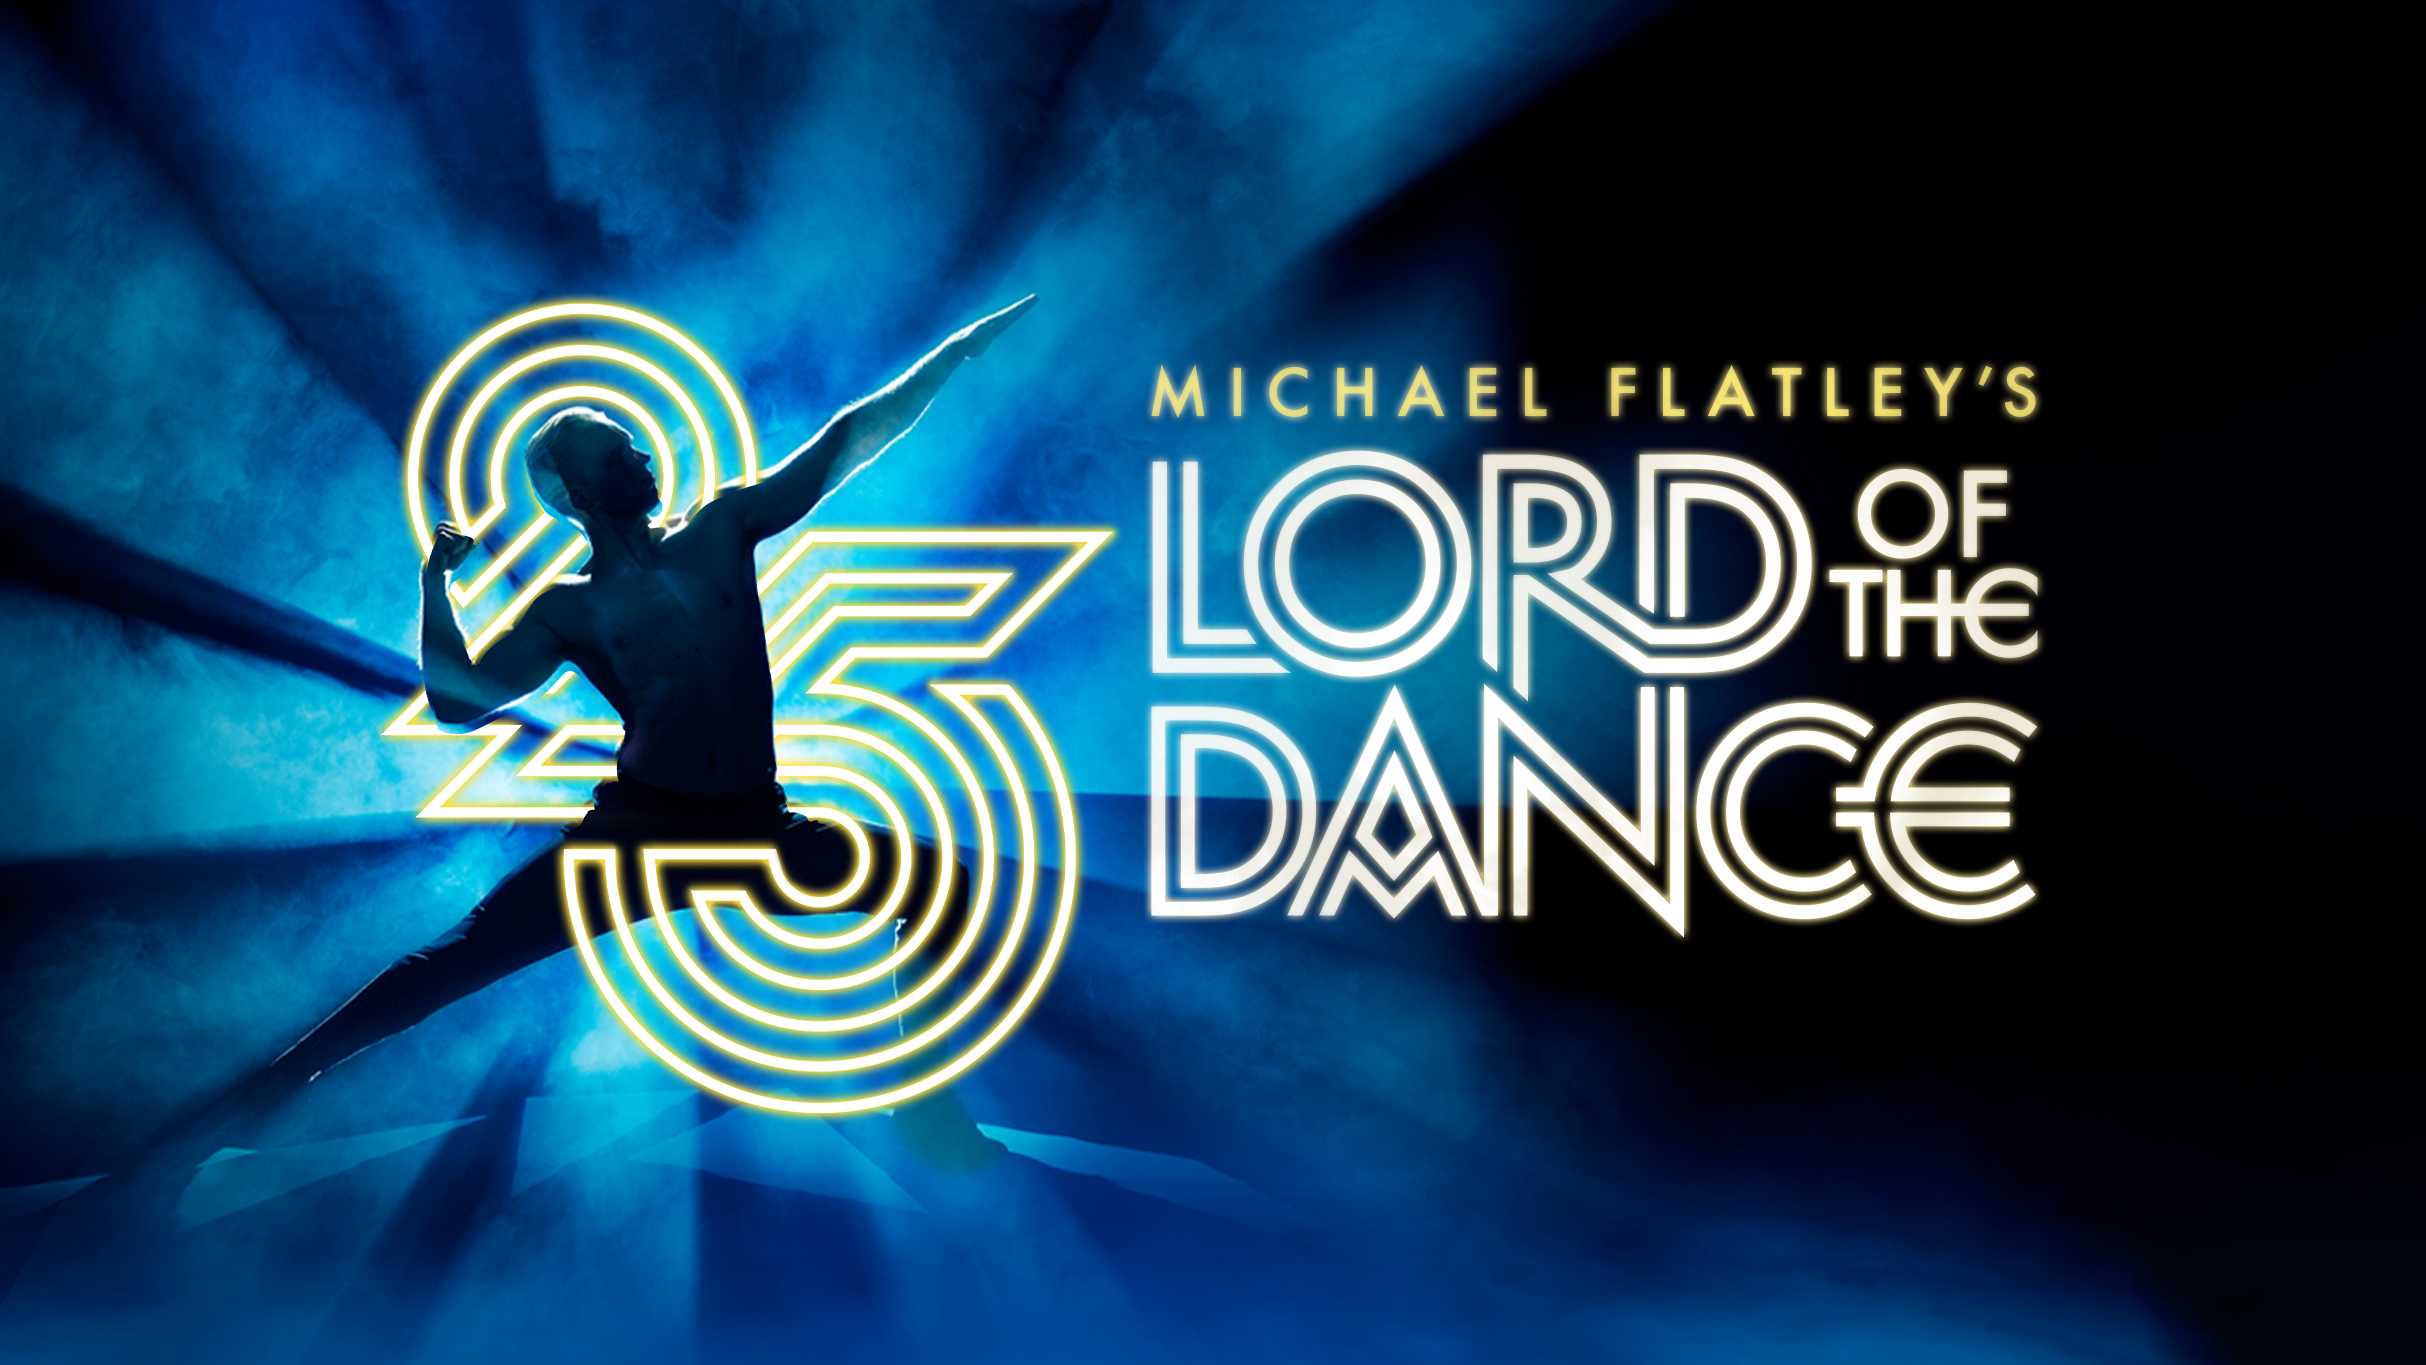 Michael Flatley s Lord of the Dance - 25th Anniversary Tour